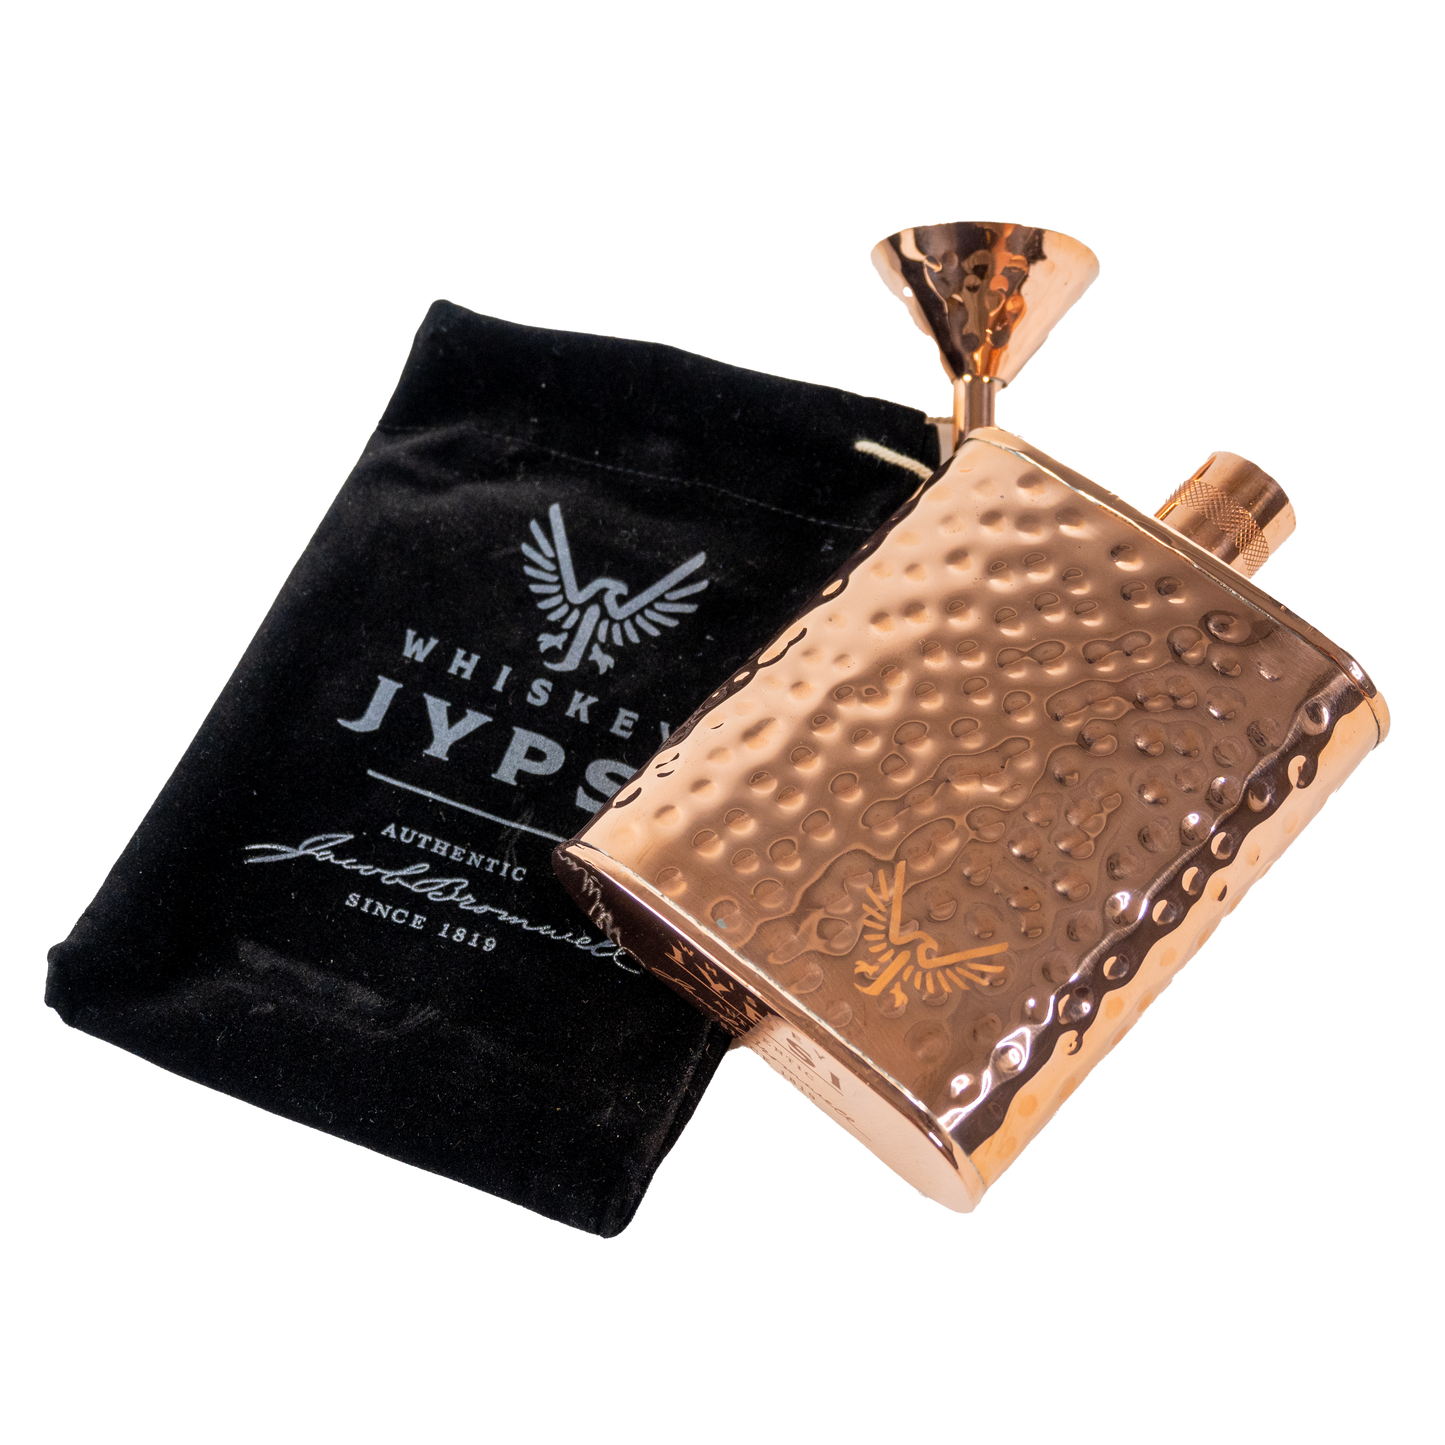 Whiskey JYPSI + Jacob Bromwell, Hammered Copper Flask